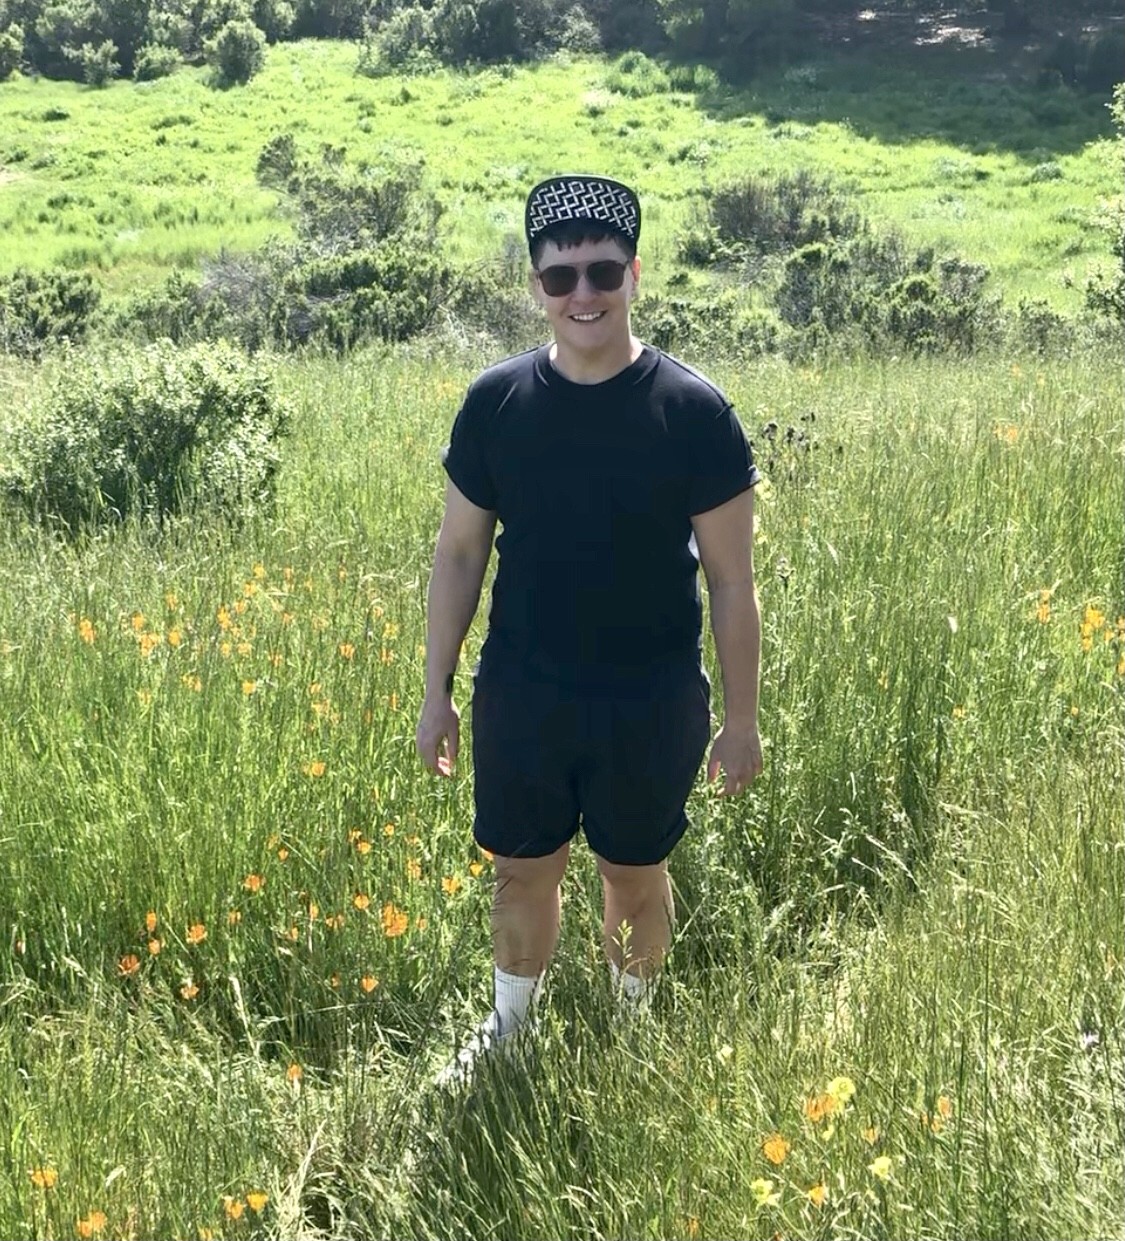 Maxe Crandall stands in a field of wildflowers, looking at the camera and smiling, wearing all black with a black and white cap.